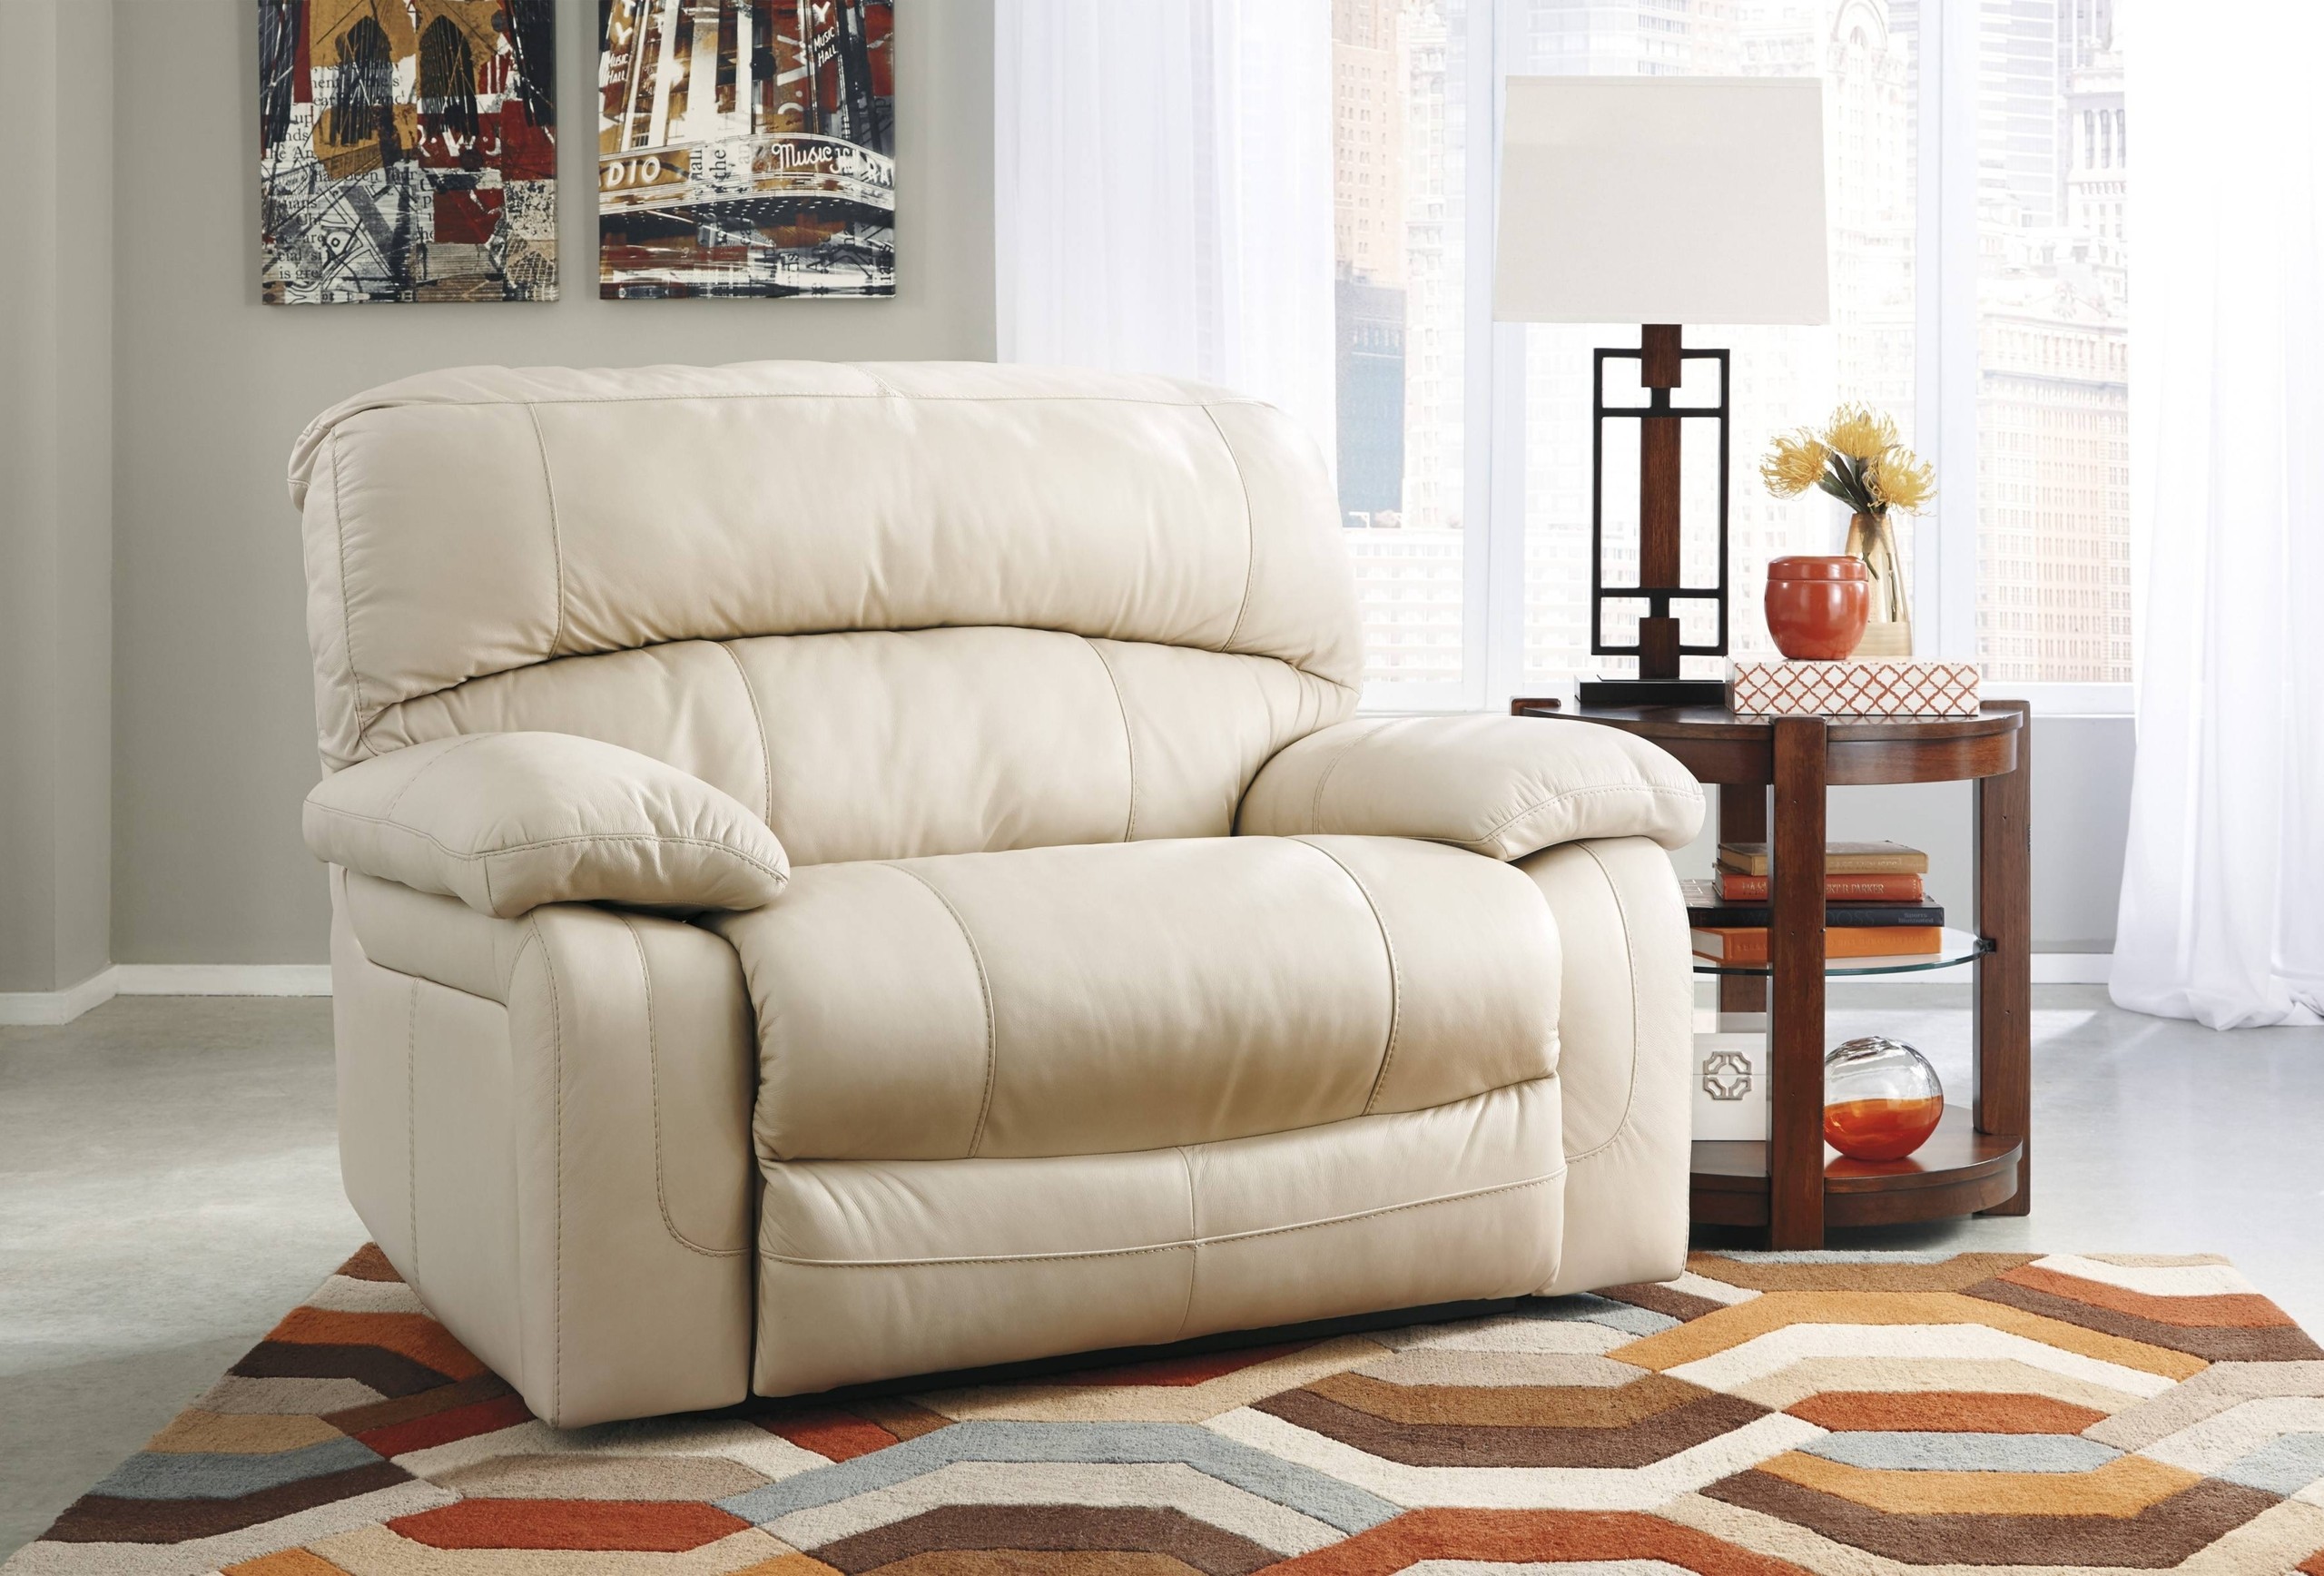 Extra wide recliner chair for large people 1